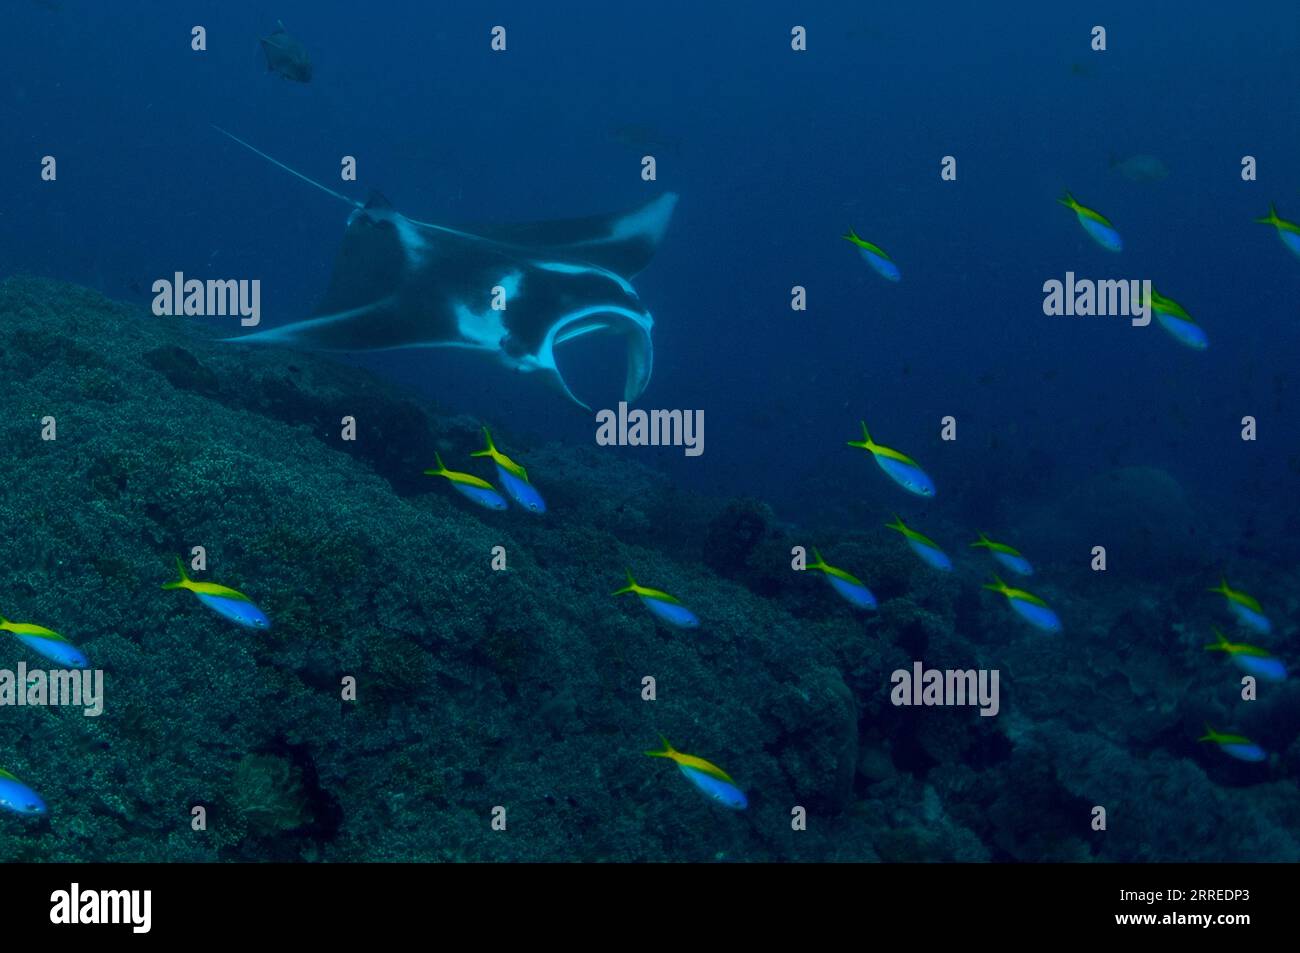 Giant Oceanic Manta Ray, Mobula birostris, classified as Endangered, with school of Blue and Yellow Fusiliers, Caesio teres, Magic Mountaindive site, Stock Photo